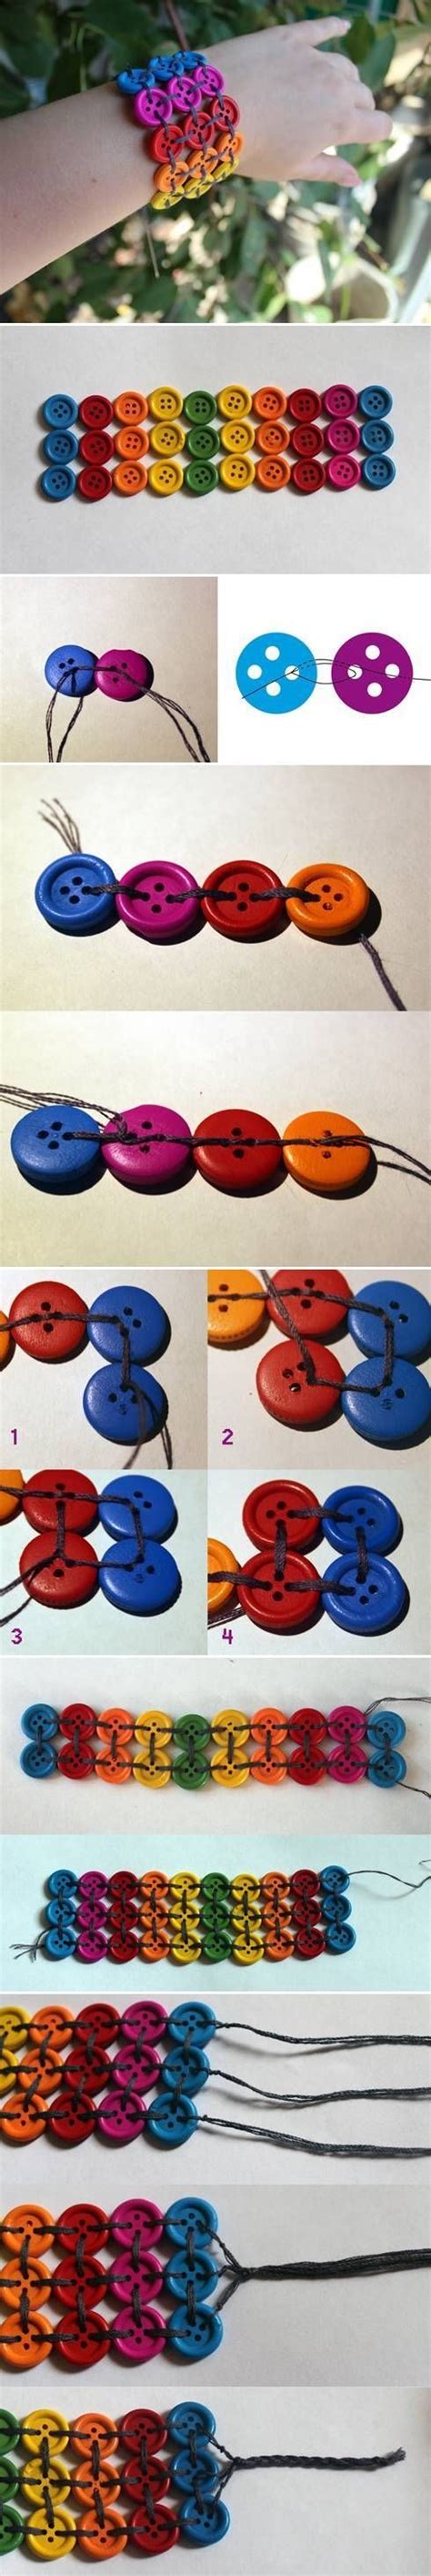 How To Make A Button Bracelet Pictures Photos And Images For Facebook